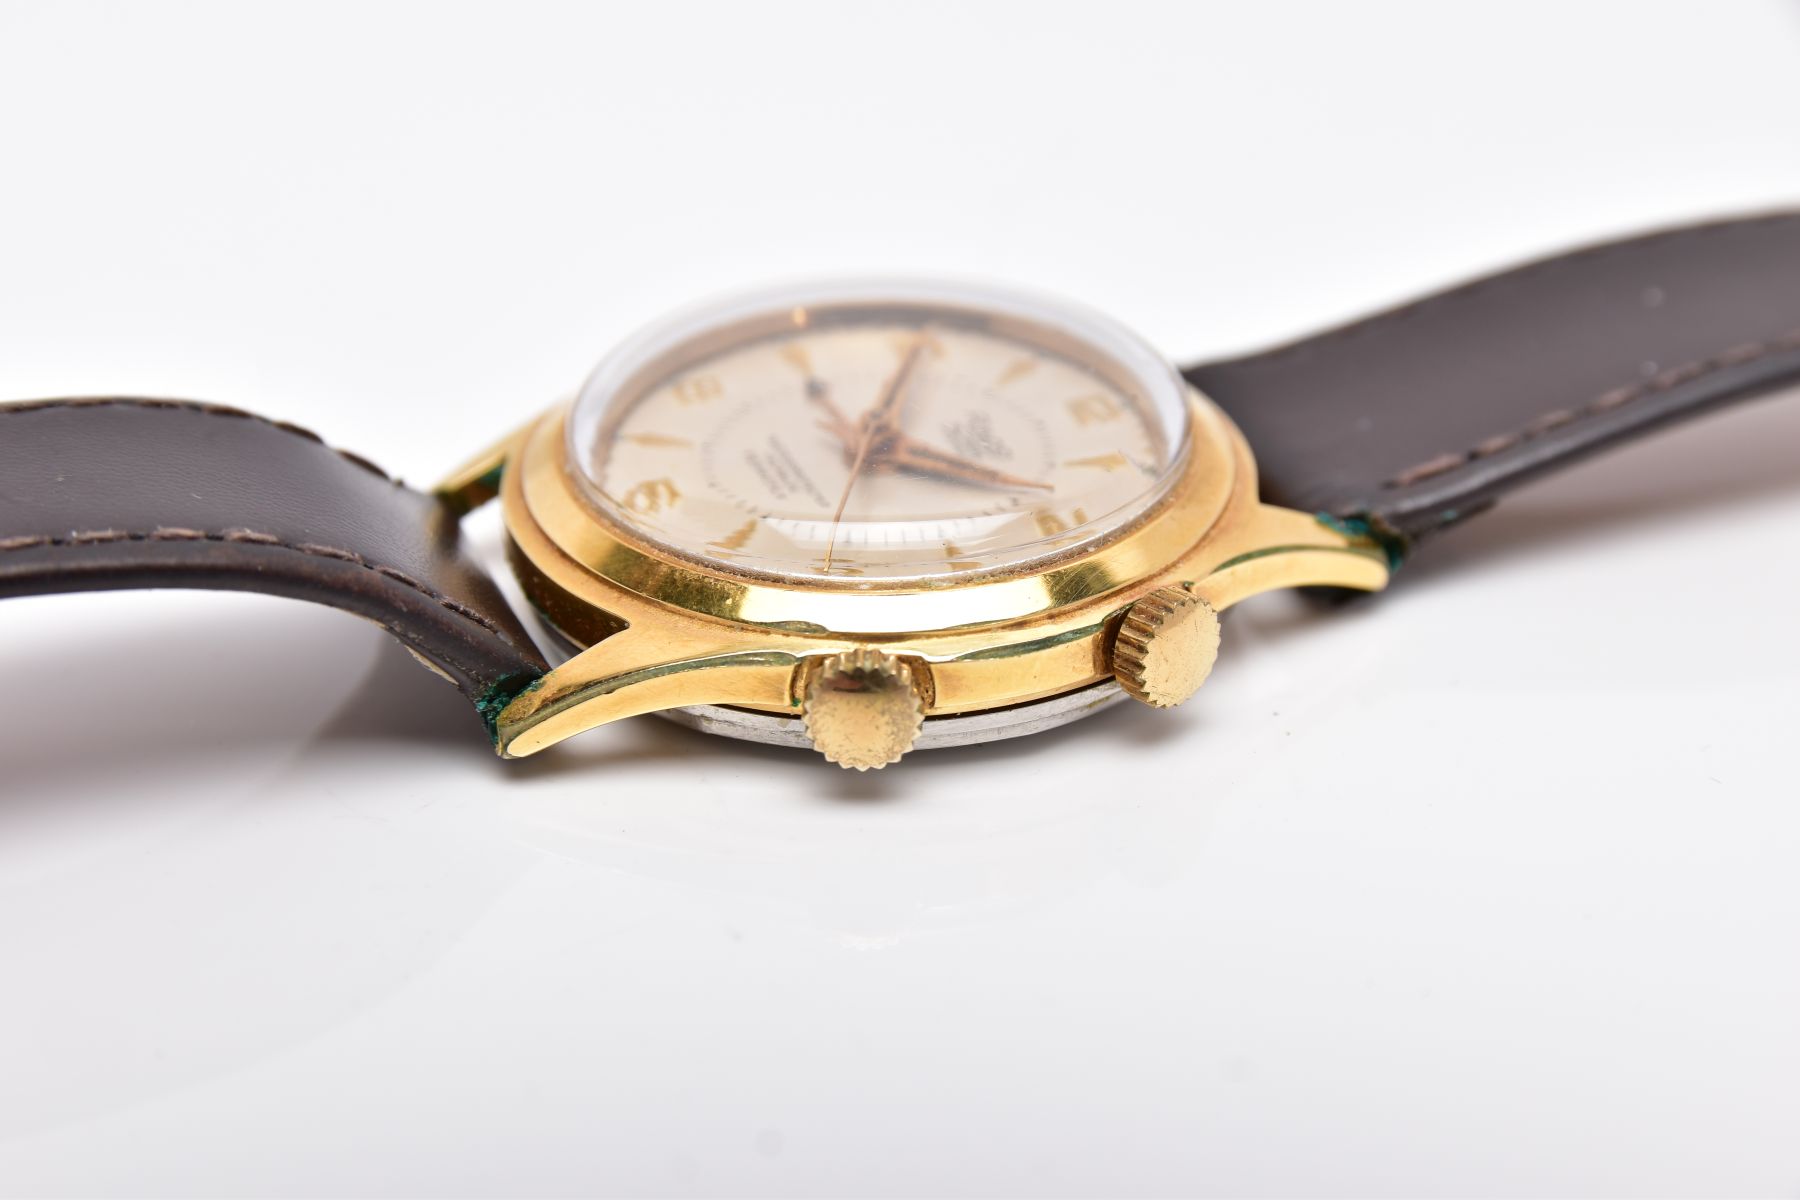 A GENT'S 'RADO' ALARM WRISTWATCH, hand wound movement, round champagne dial signed 'Radio Alarm, - Image 5 of 5